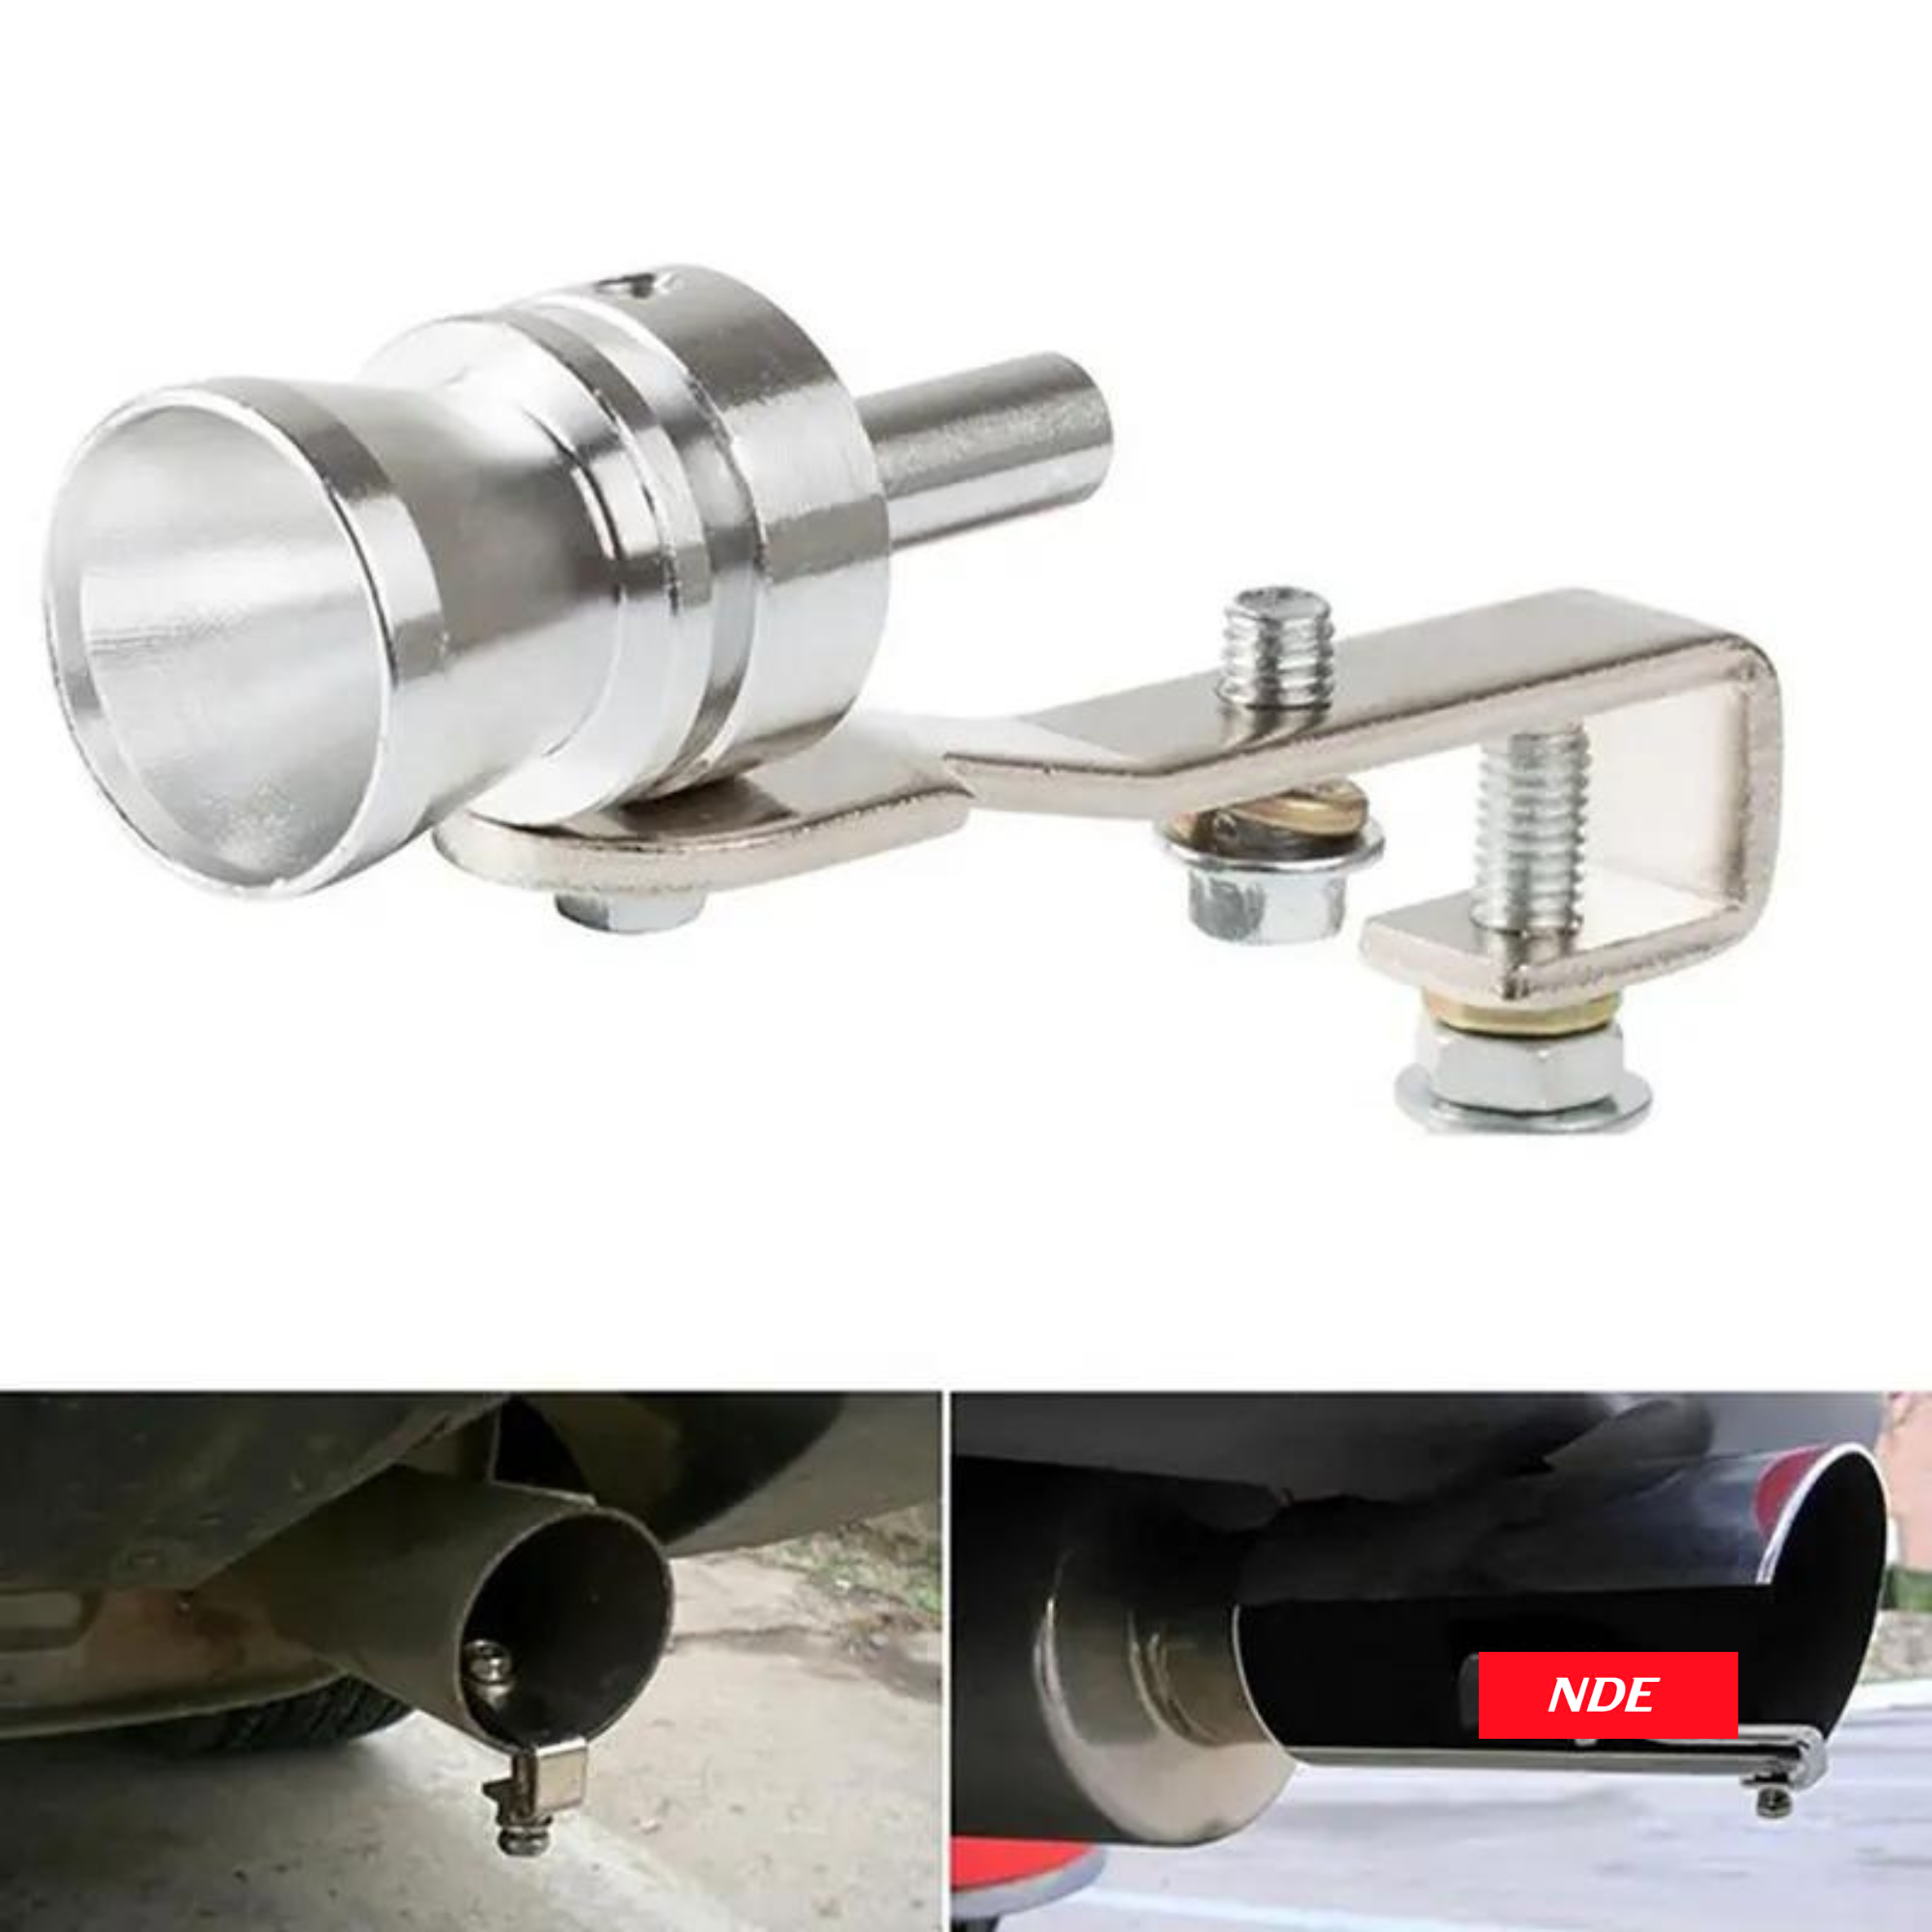 EXHAUST TURBO WHISTLE SOUND - NDE STORE